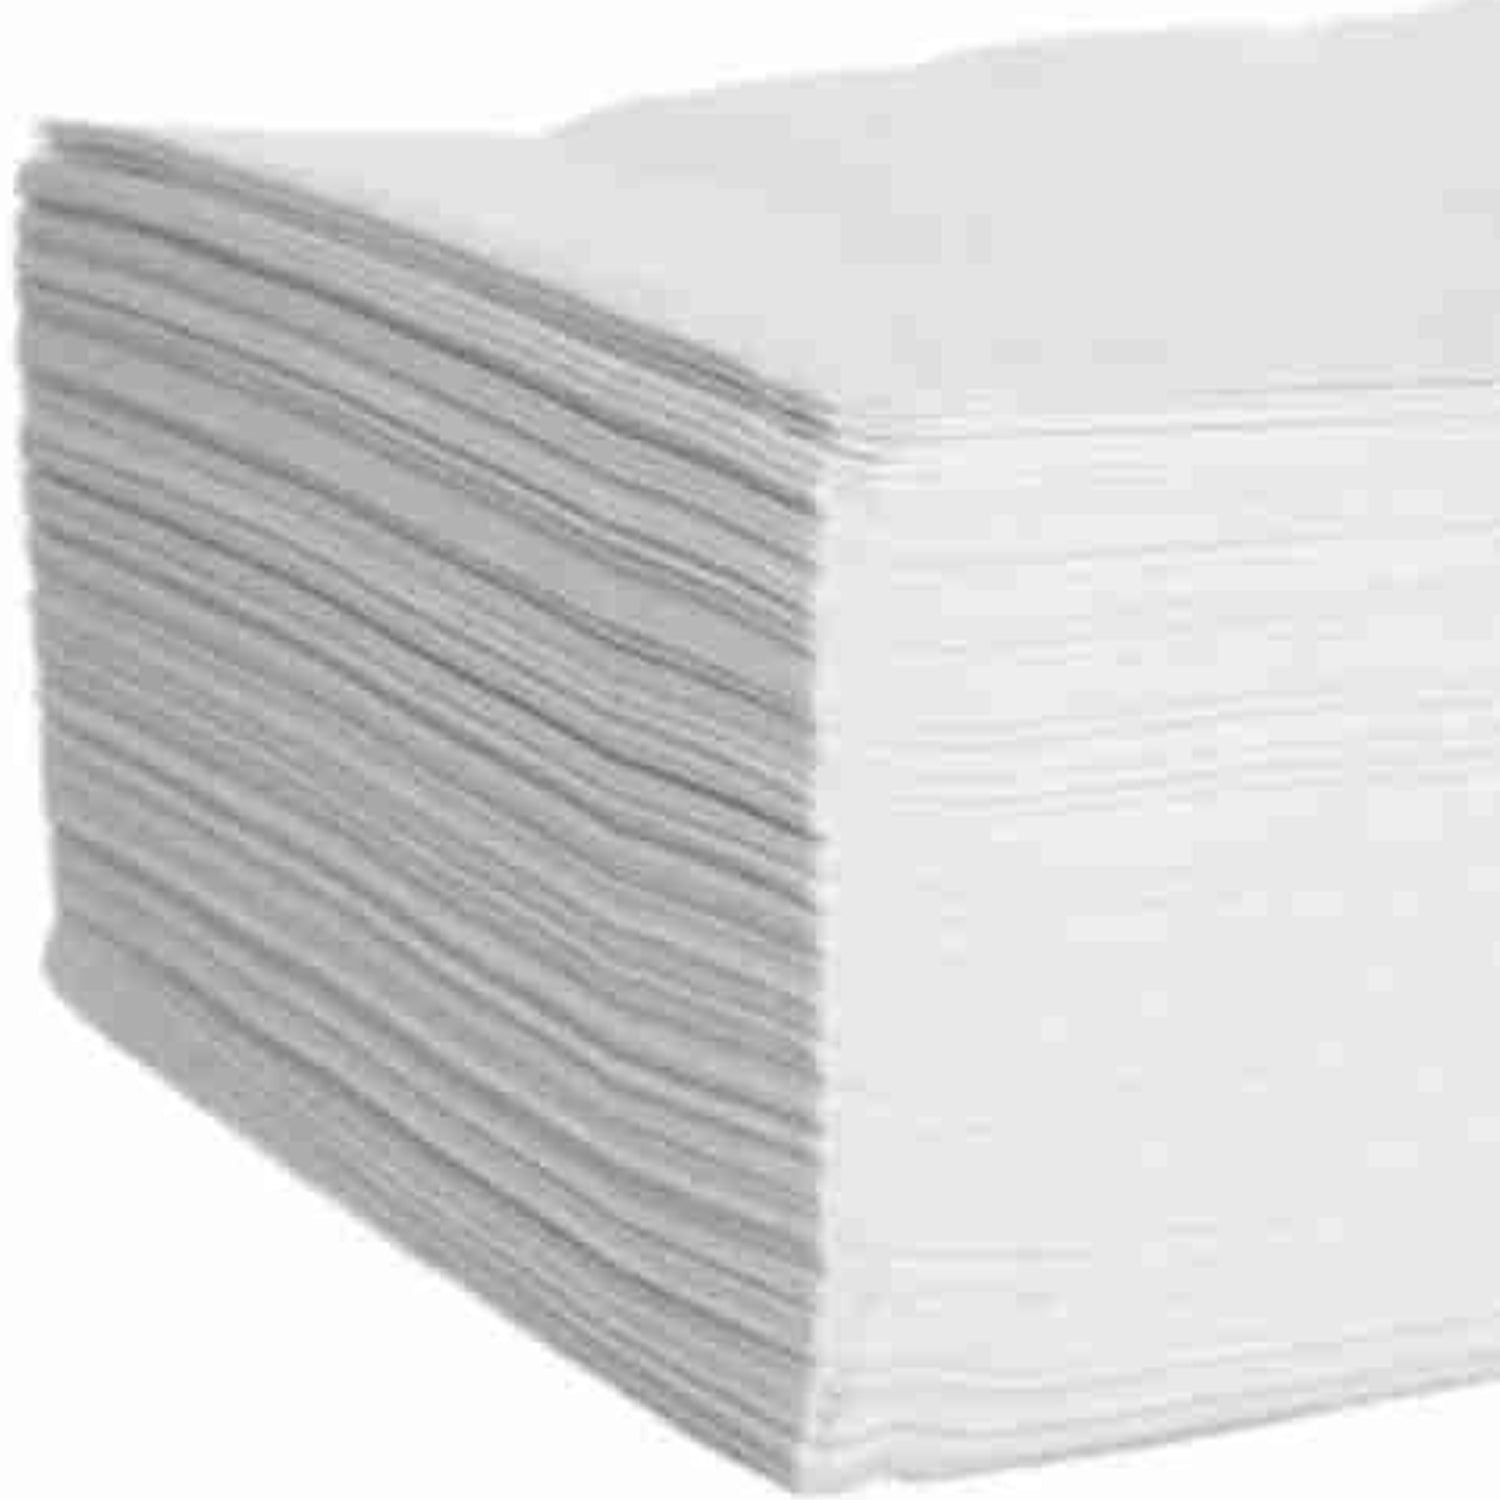 6185 Tissue Paper For Wiping And Cleaning Purposes Of Types Of Things. DeoDap